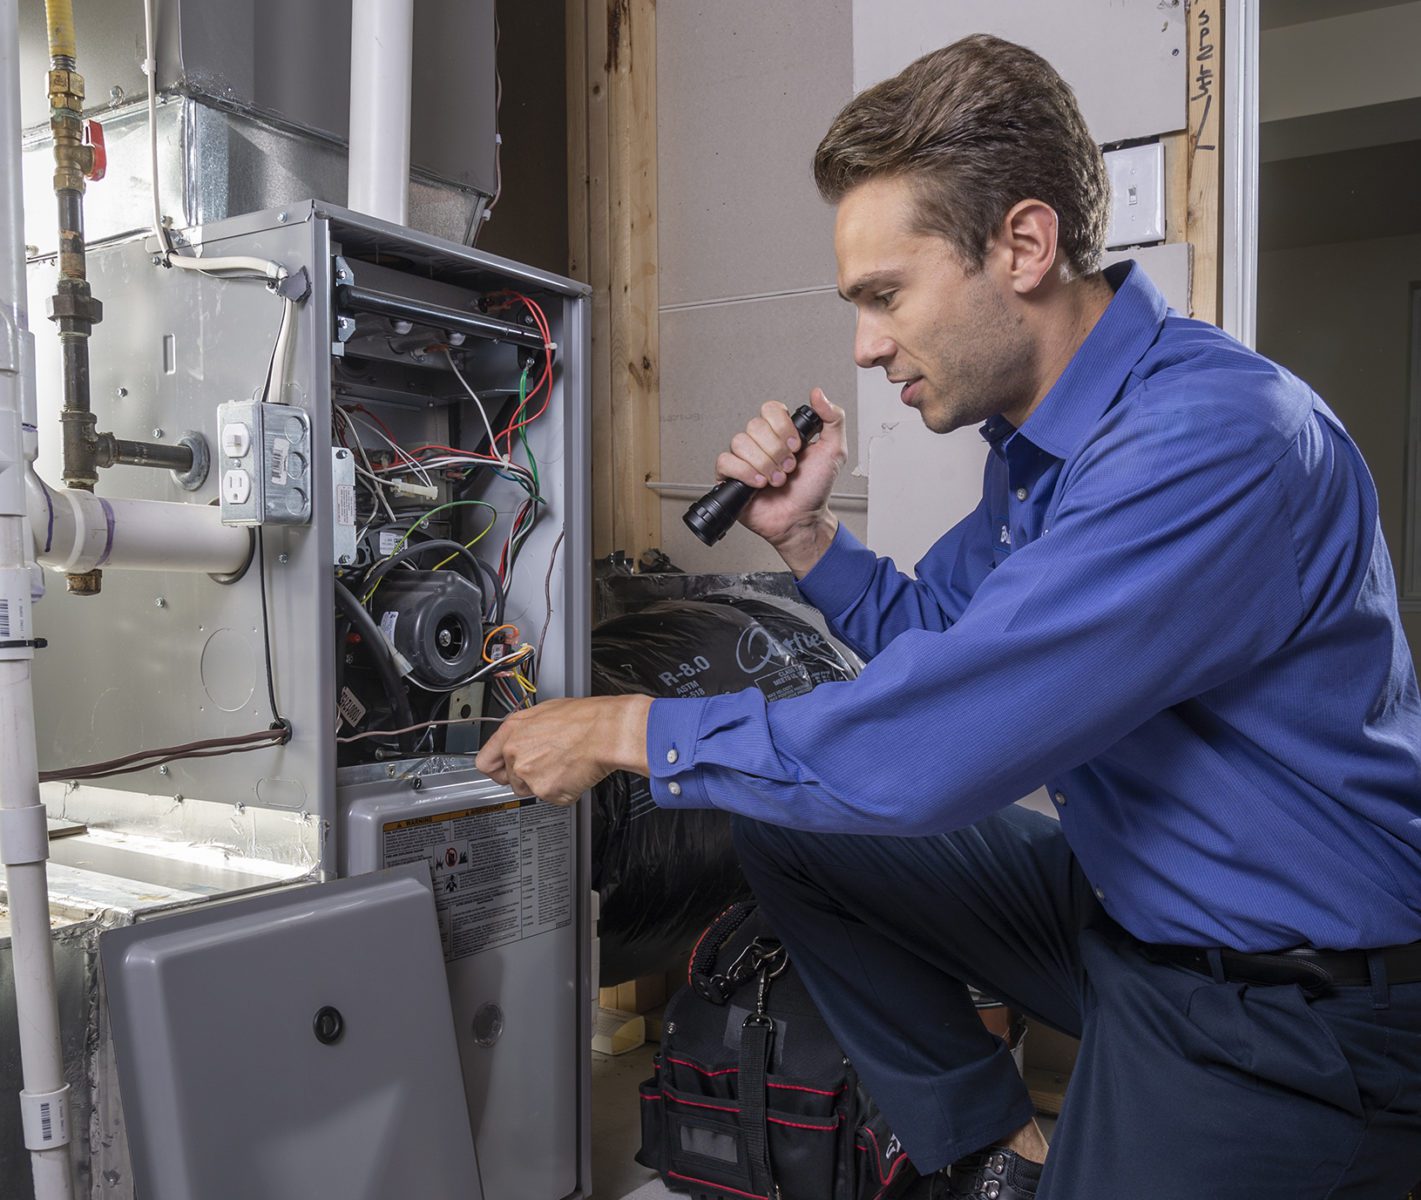 Furnace Replacement Services in Atlanta, GA